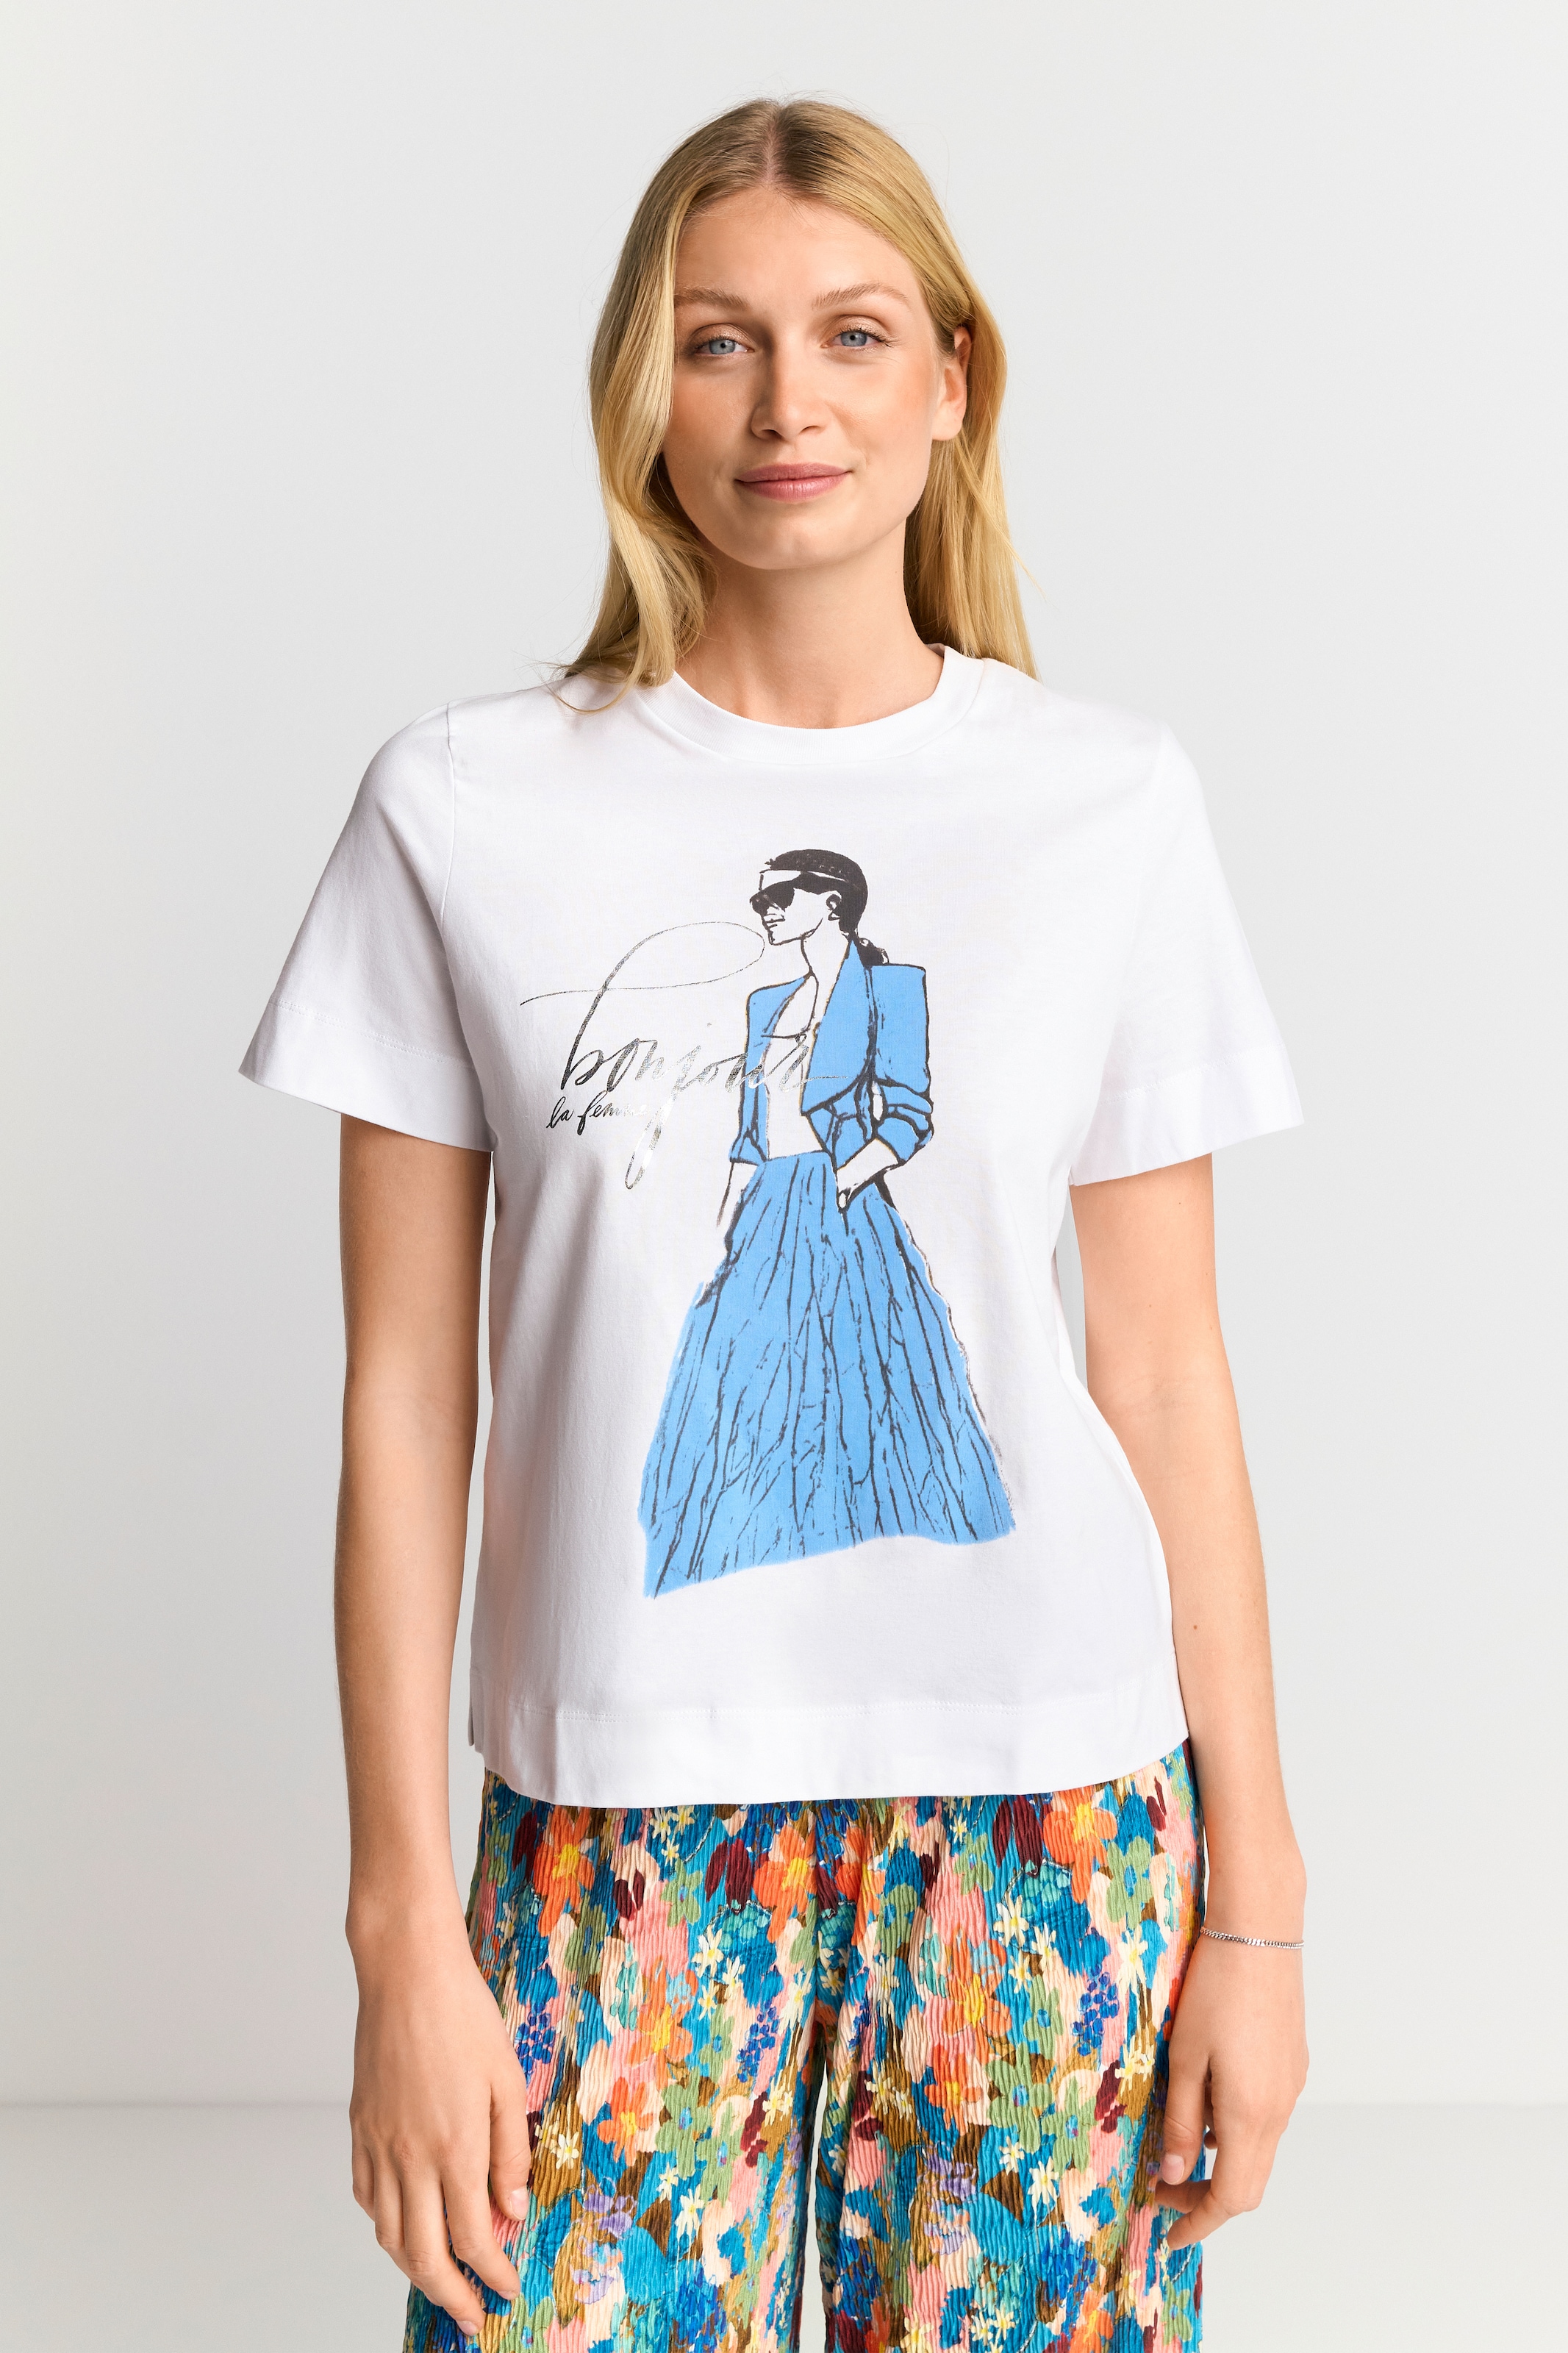 T-Shirt, Easy fit T-Shirt "Bonjour" with woman print